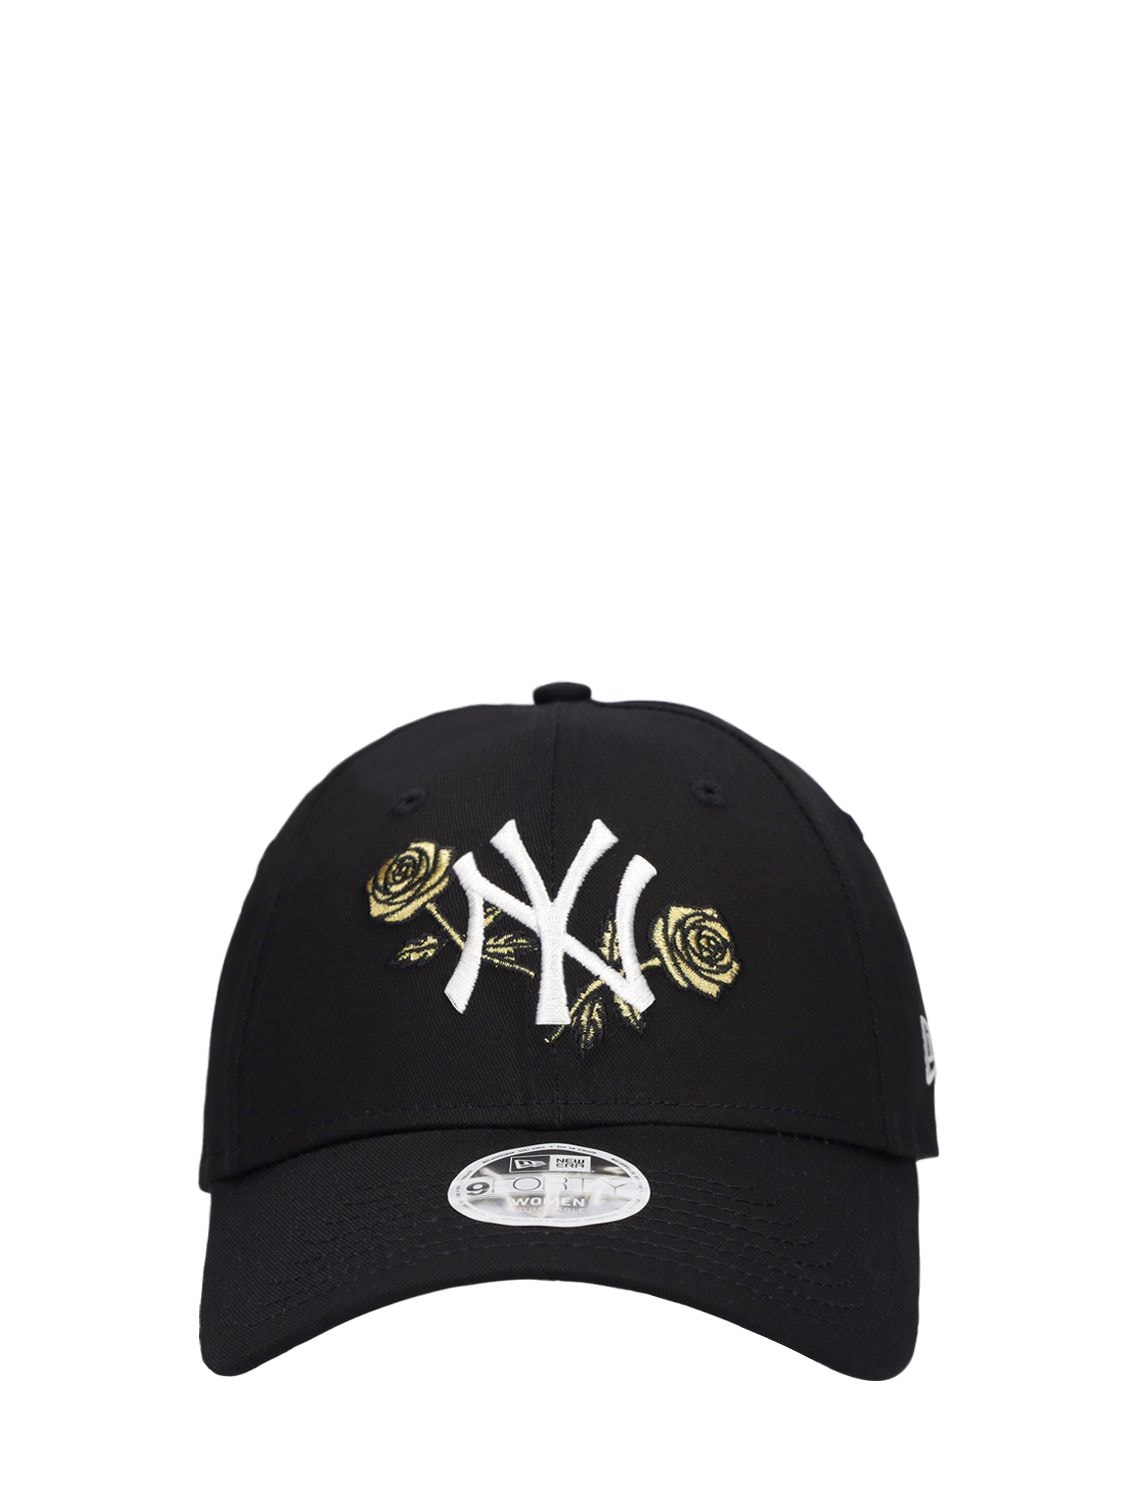 Ny Floral Metallic Embroidery 9forty Cap – WOMEN > ACCESSORIES > HATS